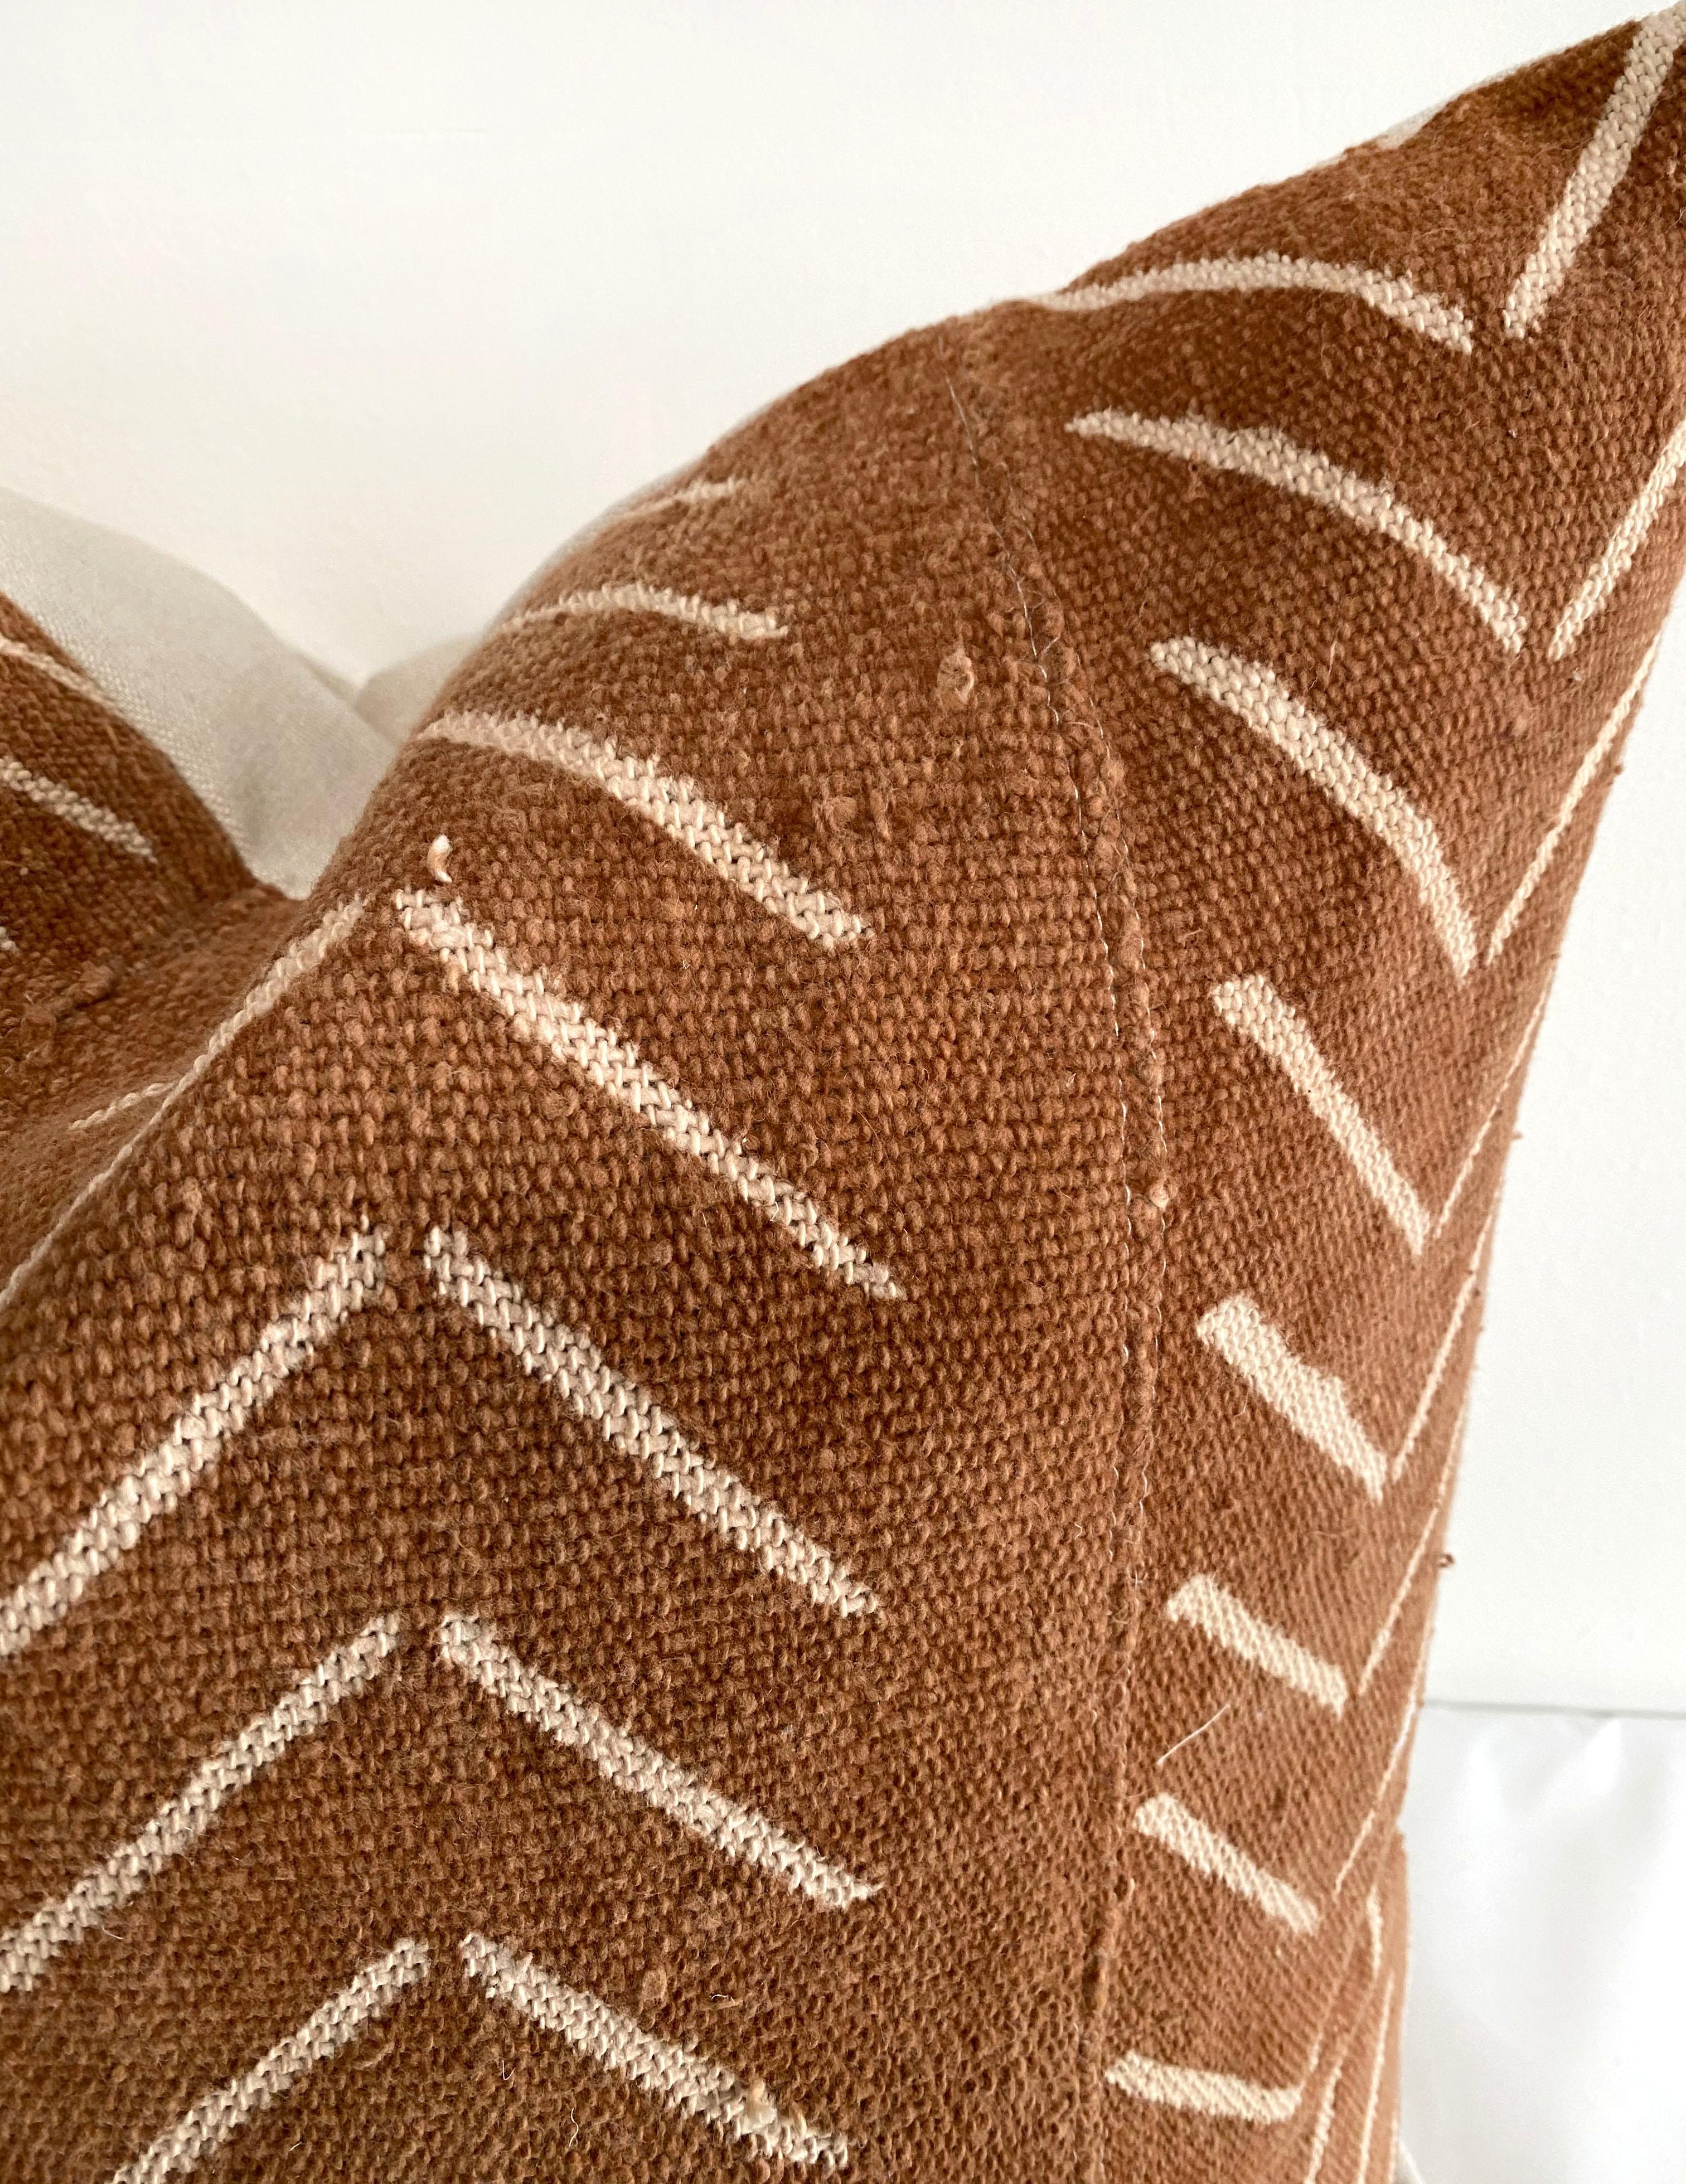 Linen Vintage Mali Cloth African Mudcloth Pillow with Down Feather Insert